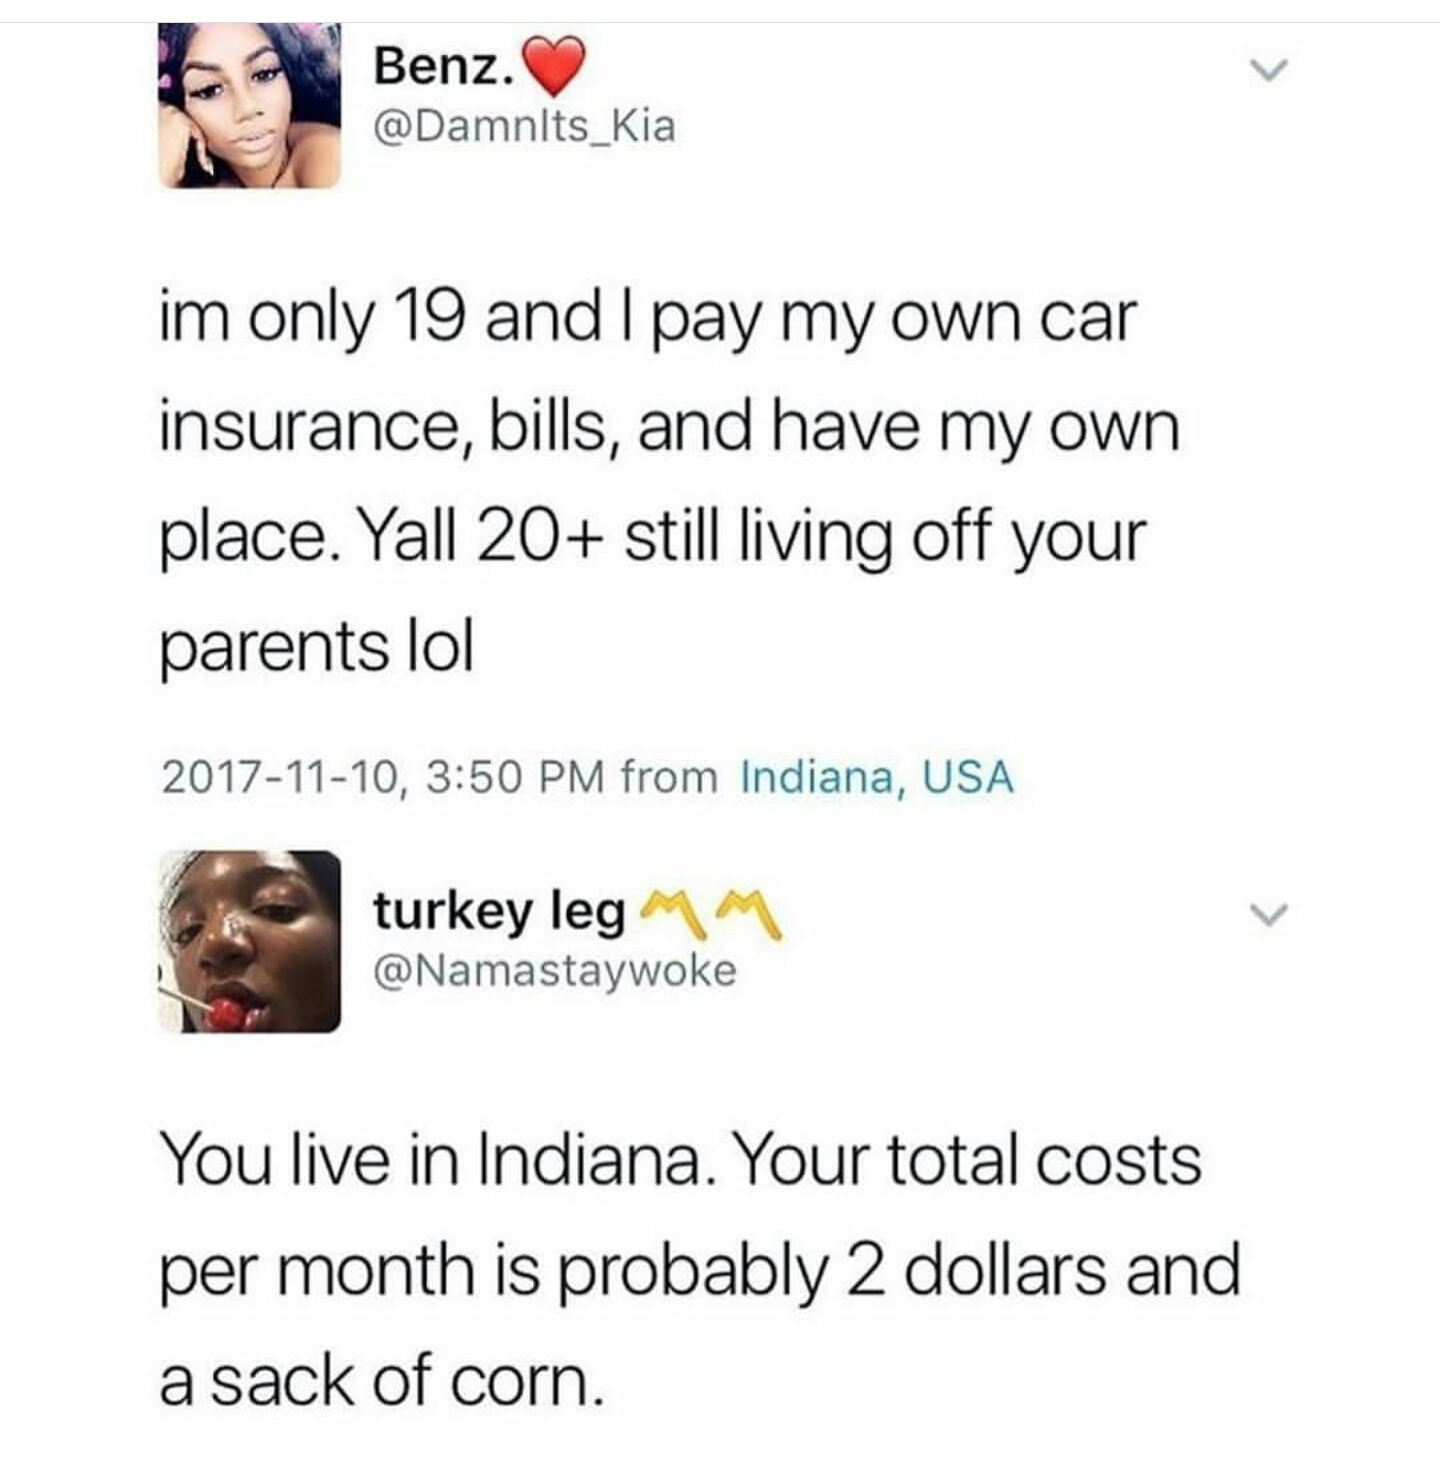 document - Benz. im only 19 and I pay my own car insurance, bills, and have my own place. Yall 20 still living off your parents lol , from Indiana, Usa turkey leg Mm You live in Indiana. Your total costs per month is probably 2 dollars and a sack of corn.